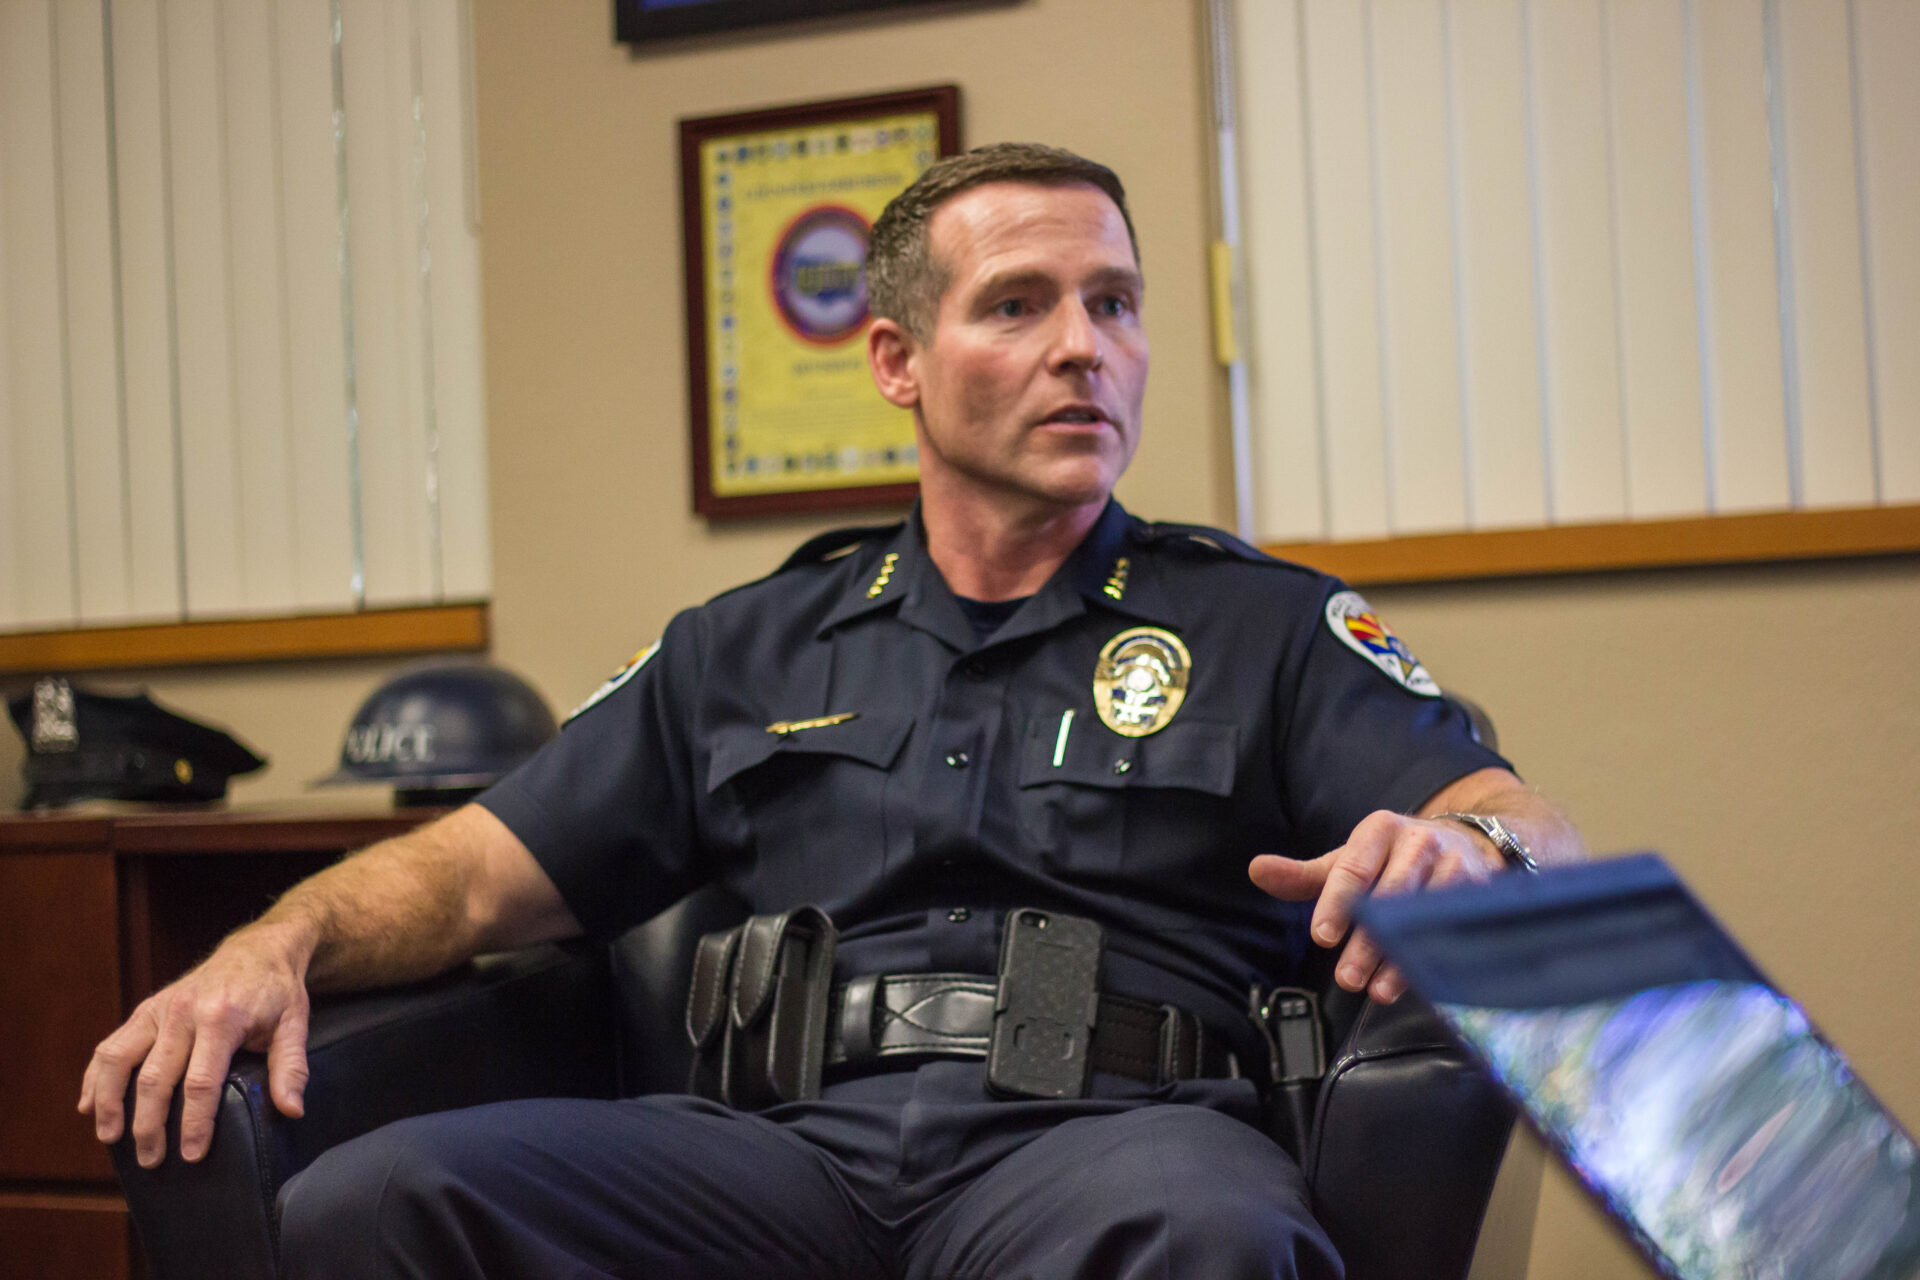 Chandler Police Chief Sean Duggan sat down with Jonathan Coronel of Wrangler News to share his views on the challenges facing law enforcement. (Photo by Alex J. Walker, Wrangler News)